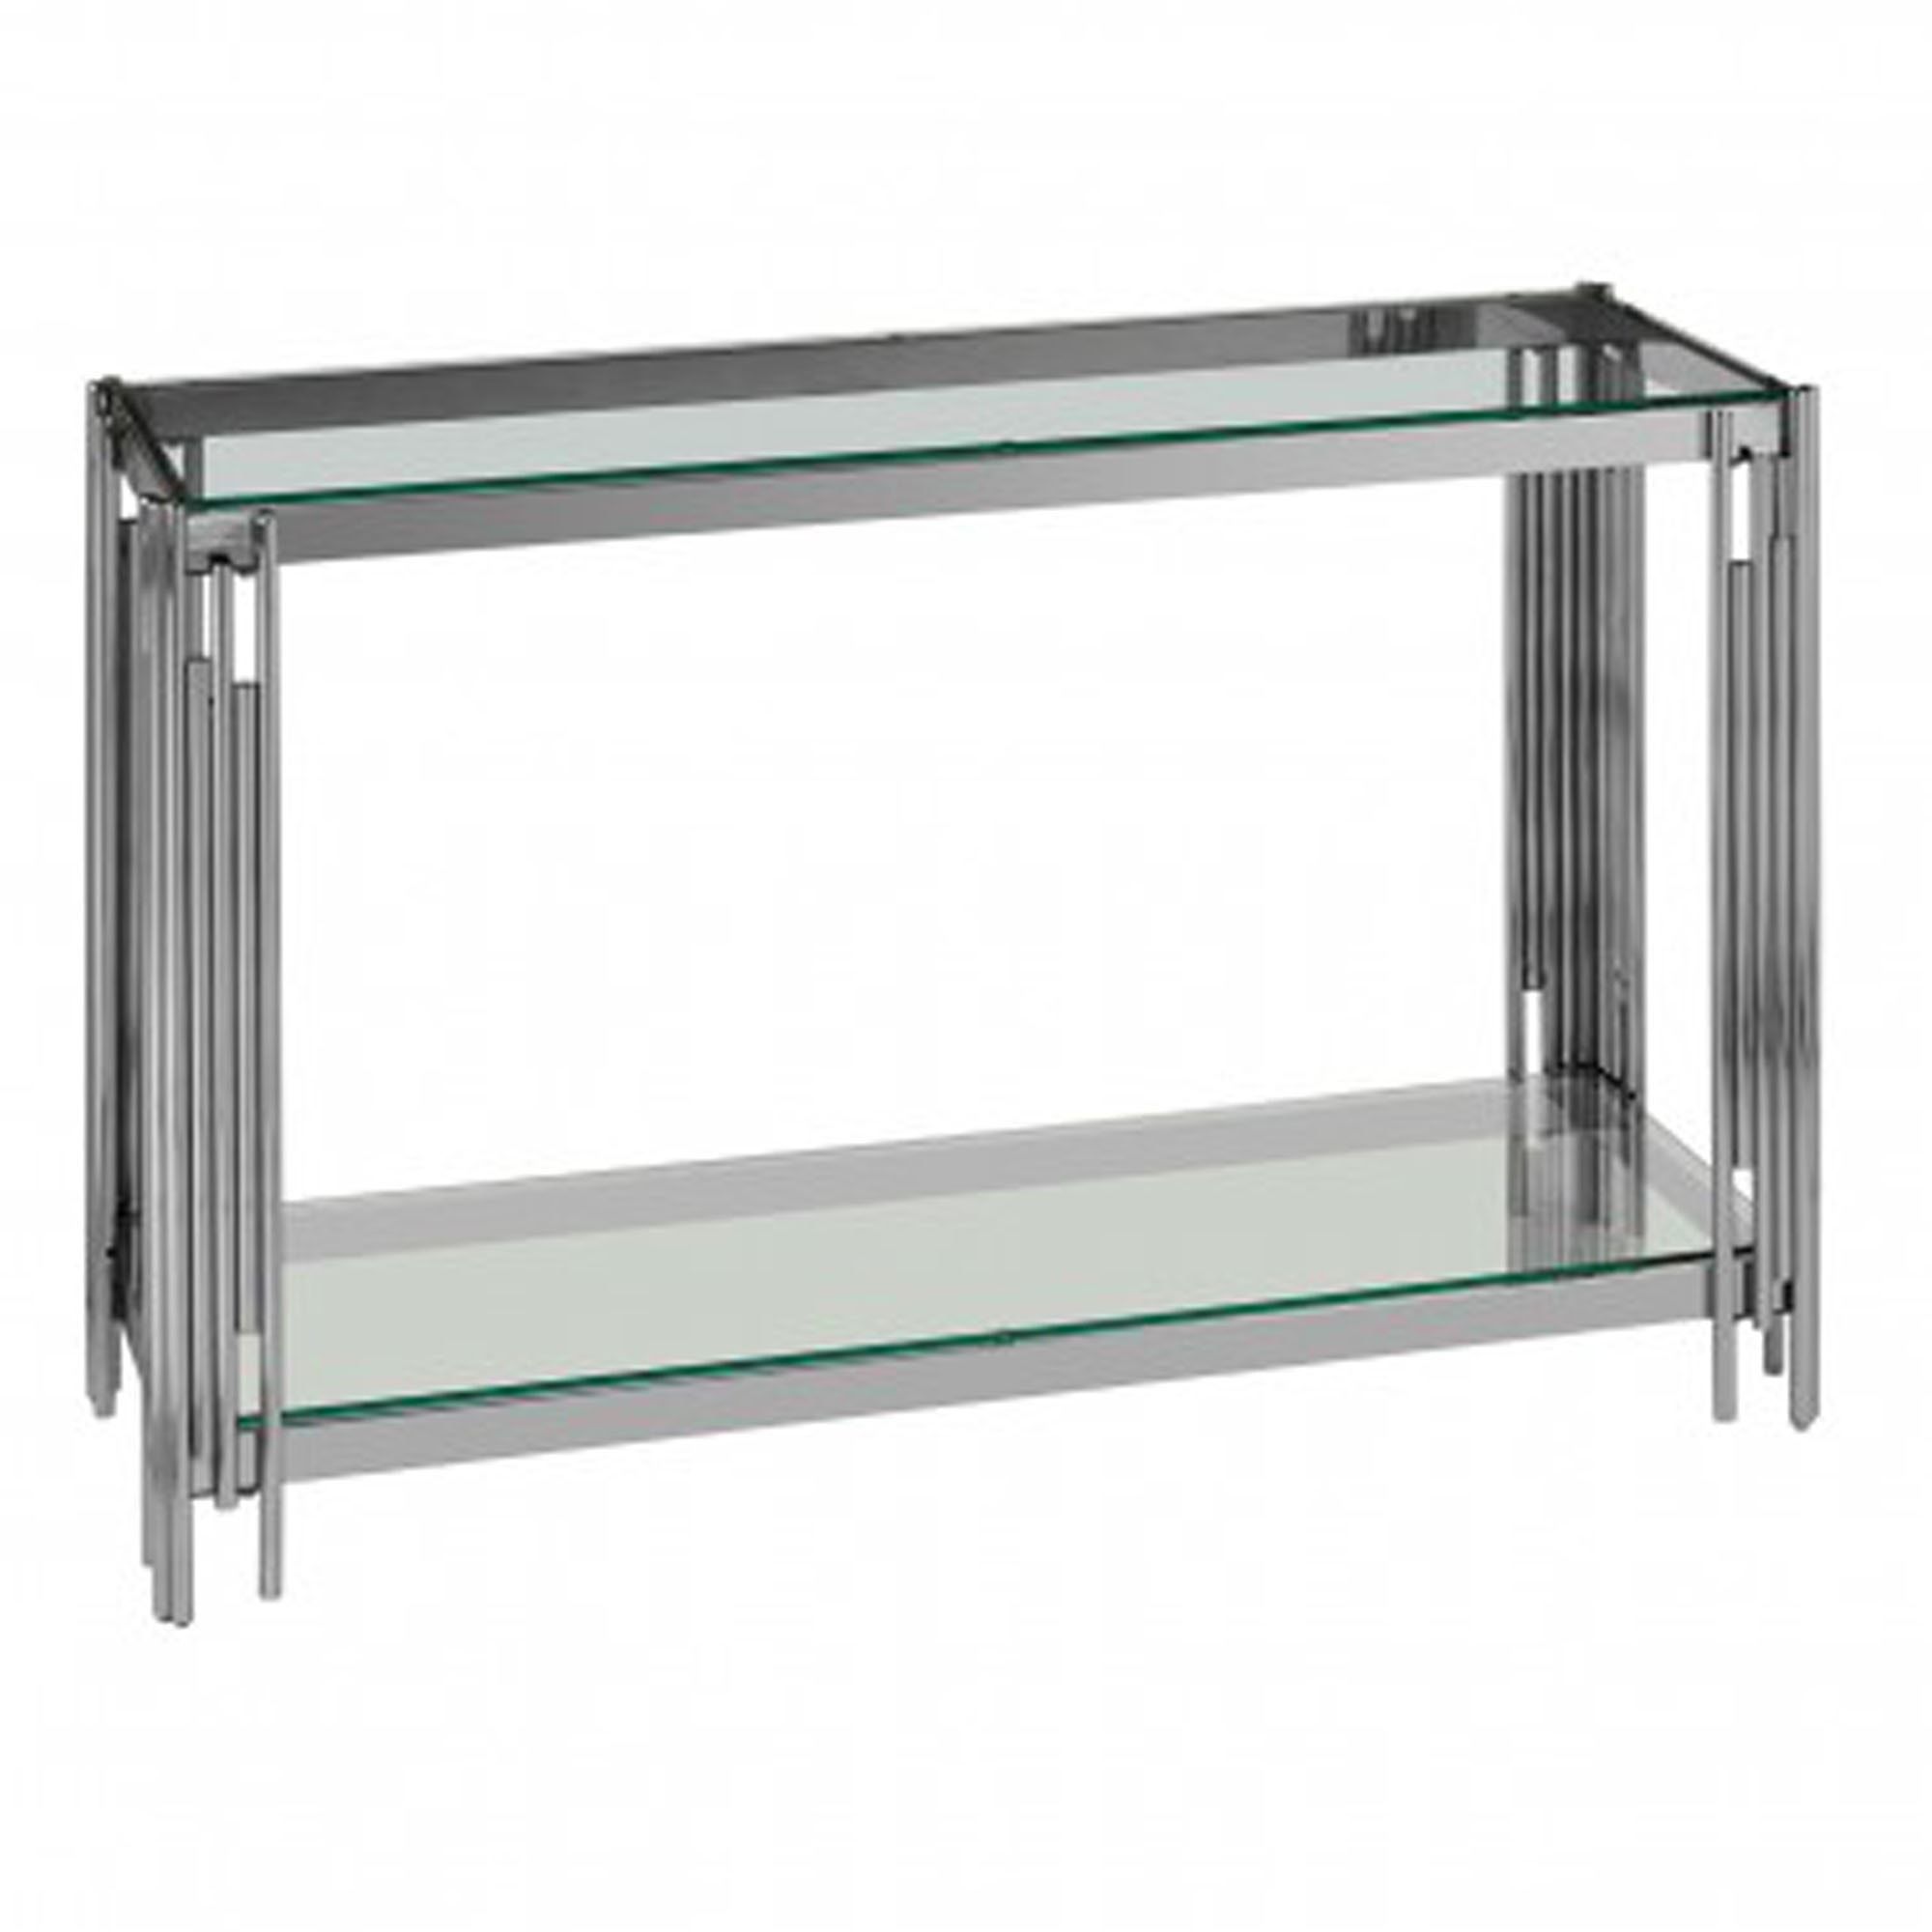 Alvaro Stainless Steel Console Table | Modern Console Tables For Stainless Steel Console Tables (View 20 of 20)